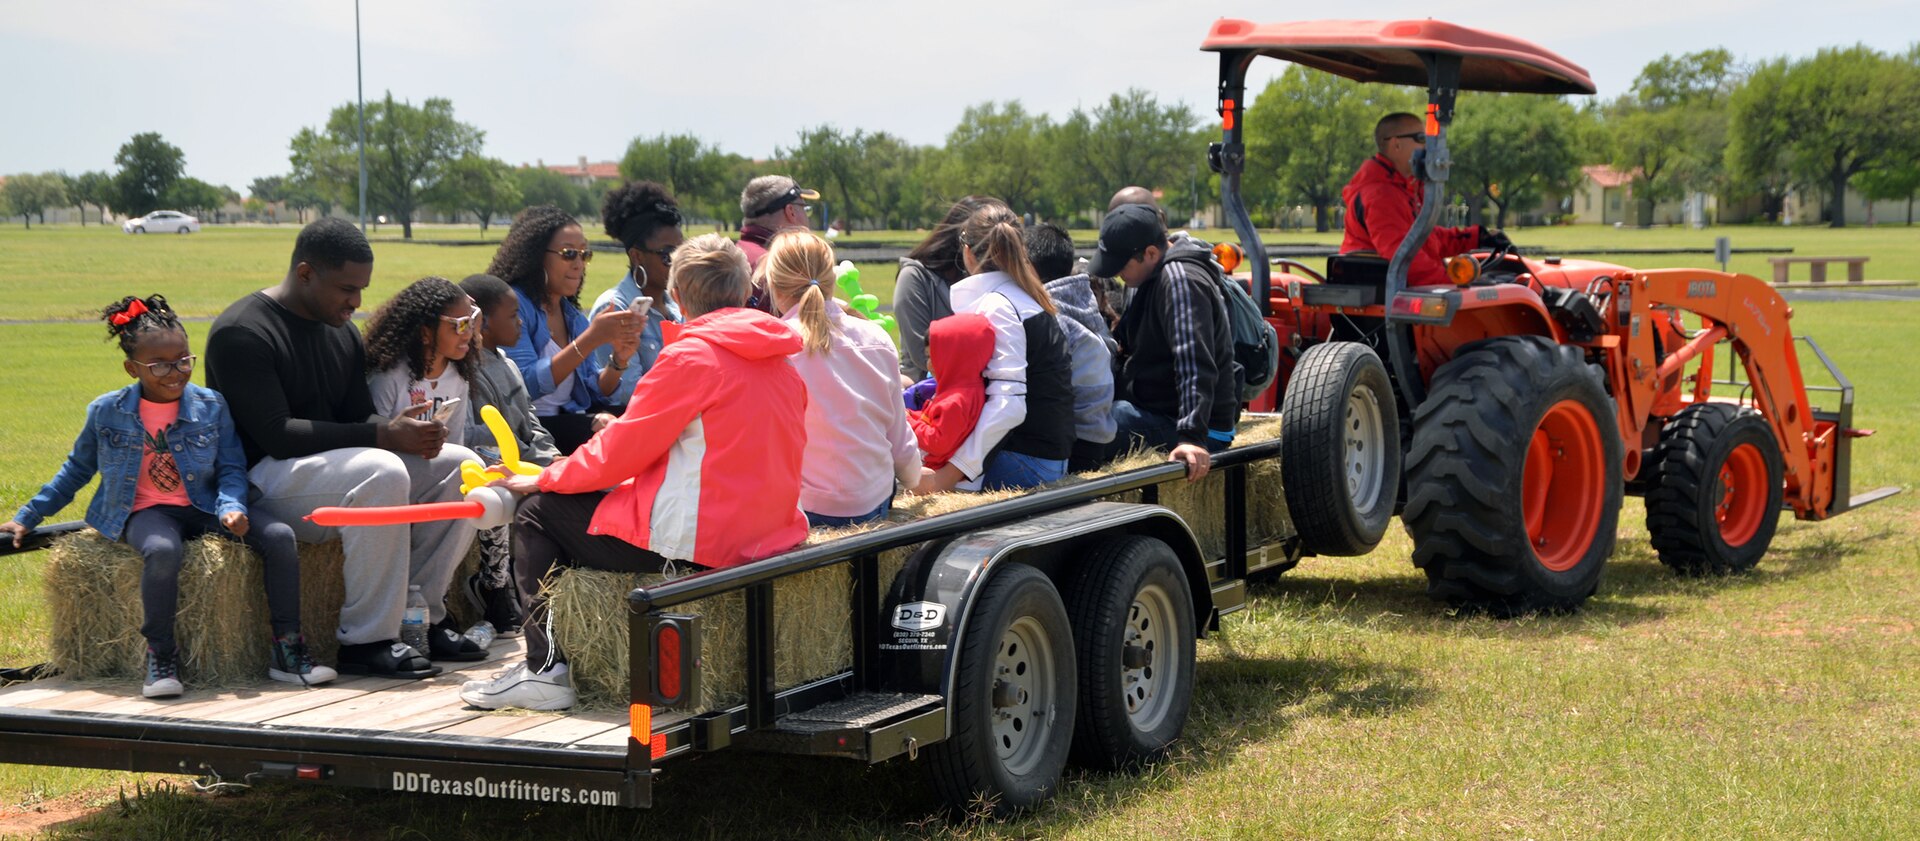 A leisurely hayride was one was to get around at the annual Cowboys and Heroes event held at MacArthur Parade Field at Joint Base San Antonio-Fort Sam Houston April 14.